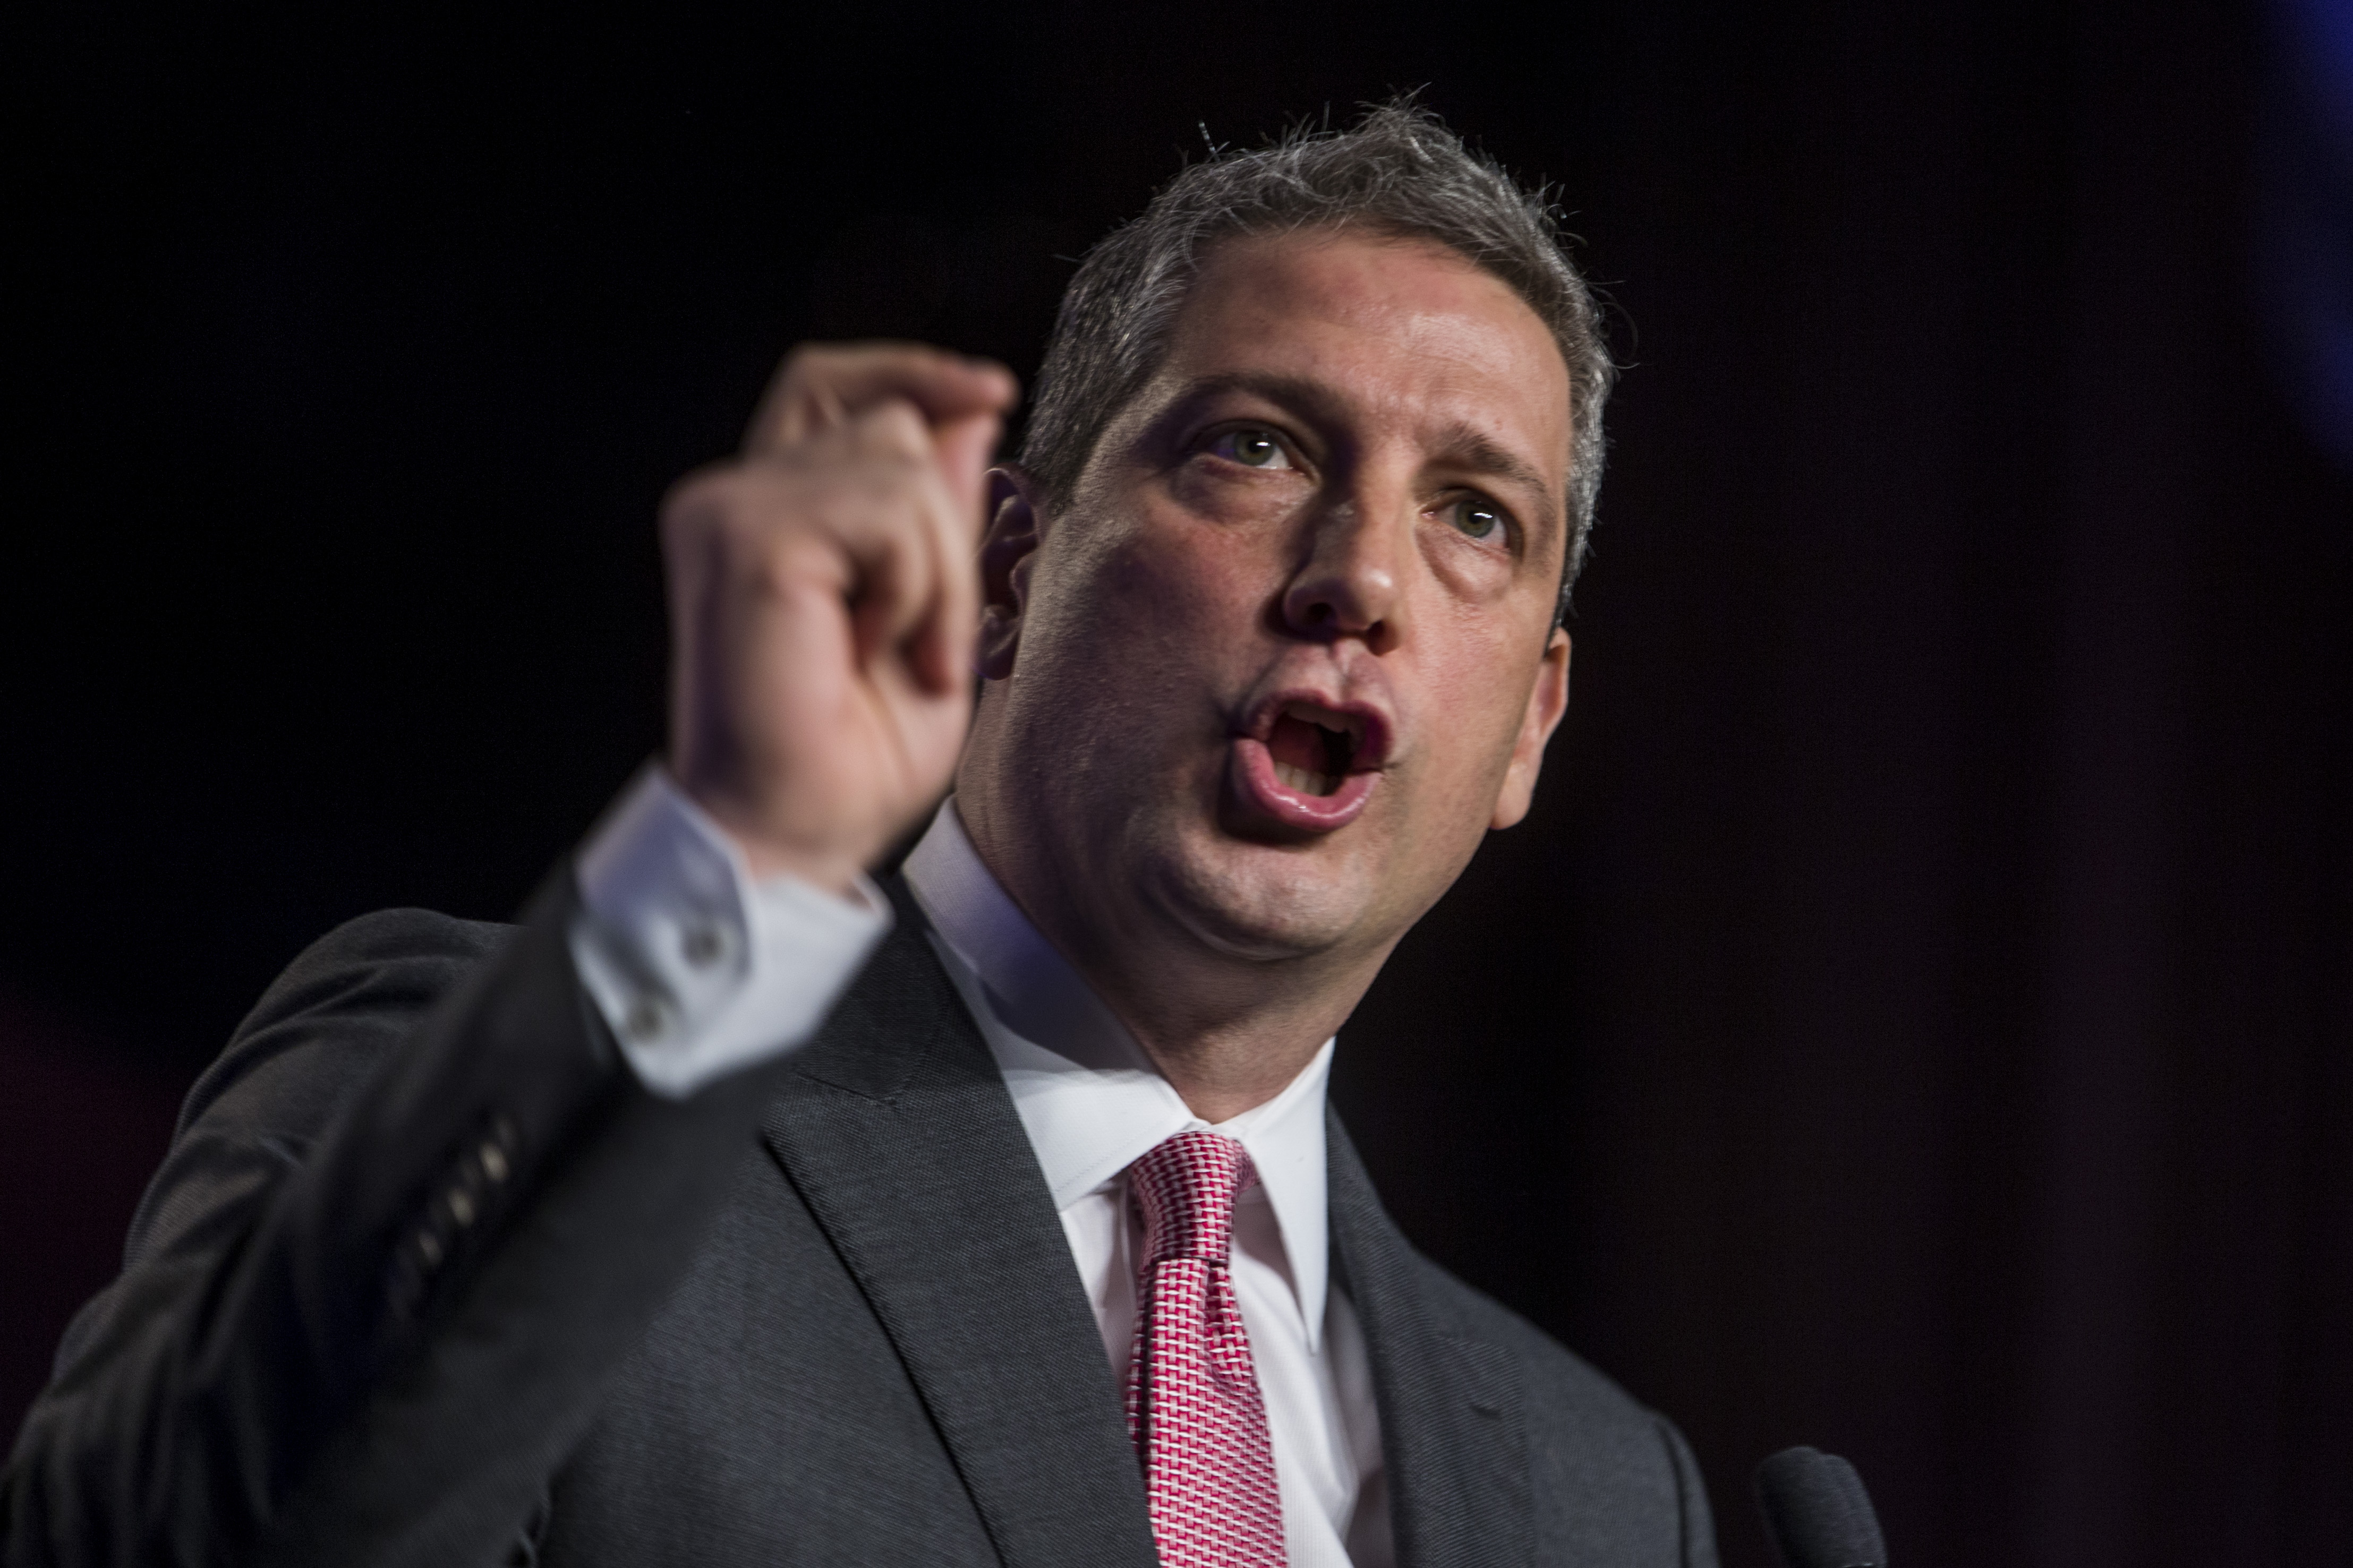 Rep. Tim Ryan (D-OH) speaks during the North American Building Trades Unions Conference at the Washington Hilton on April 10, 2019 in Washington, DC. 